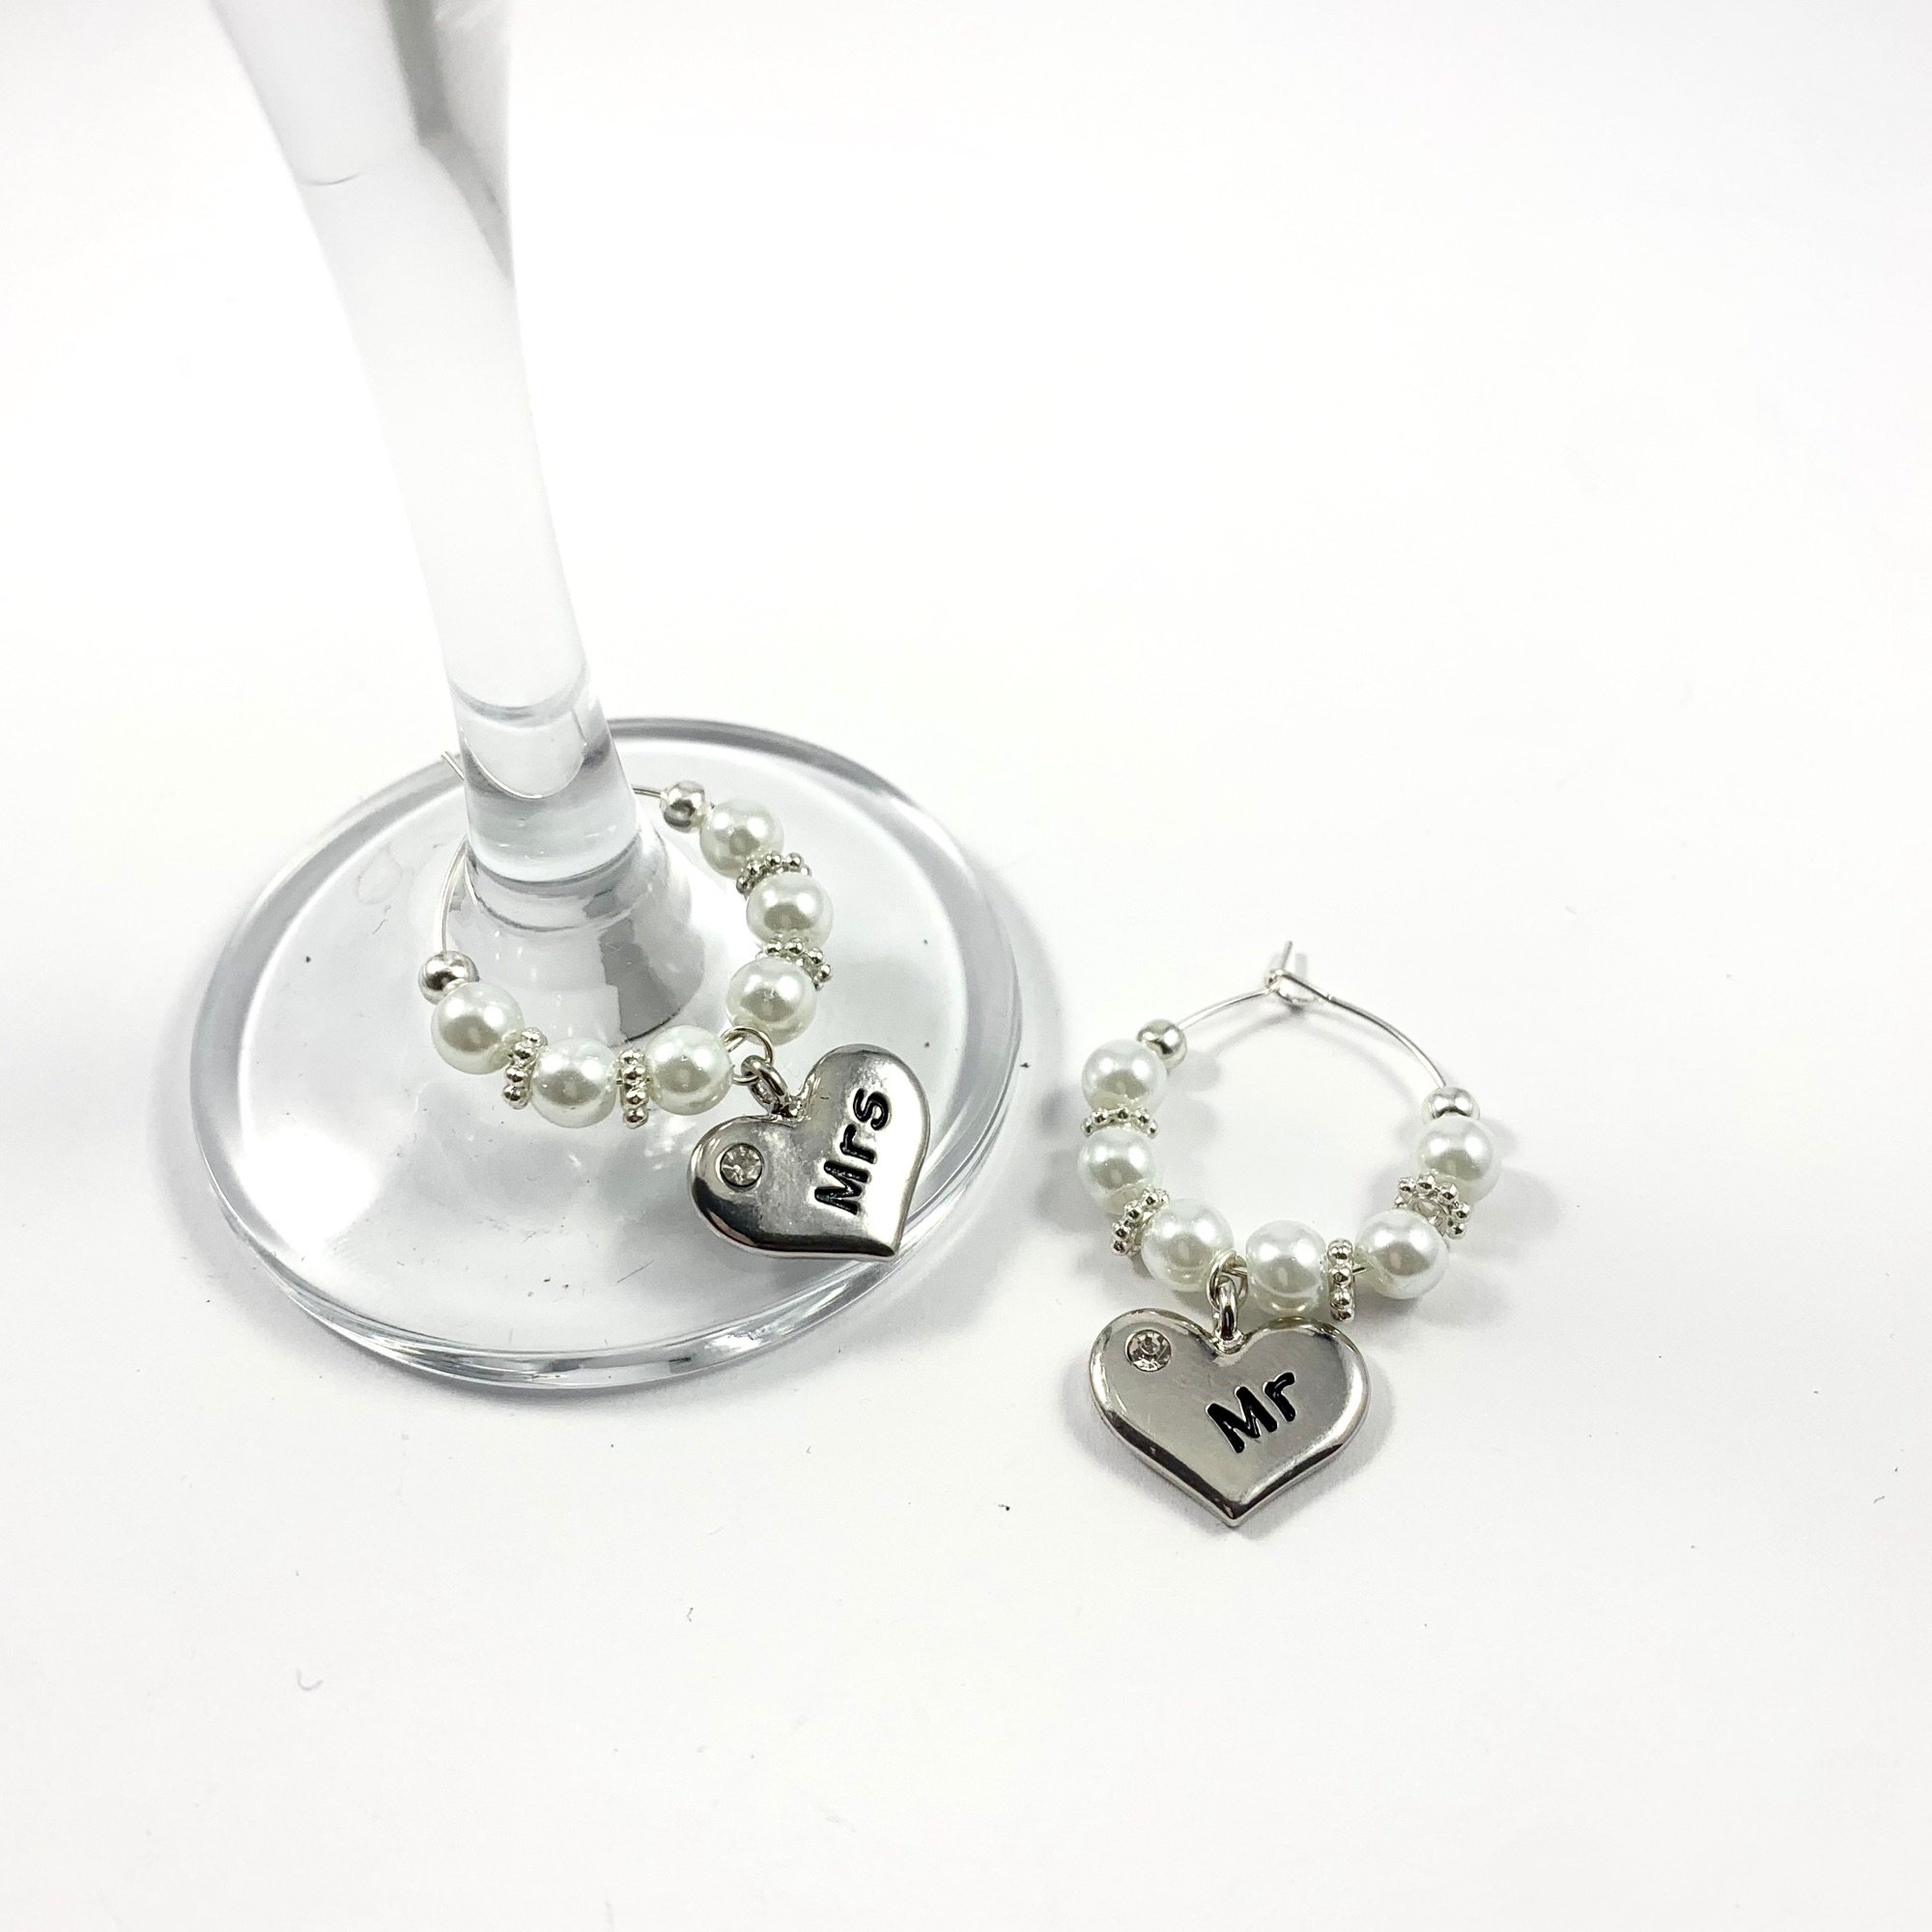 Mr and Mrs Wine Charms